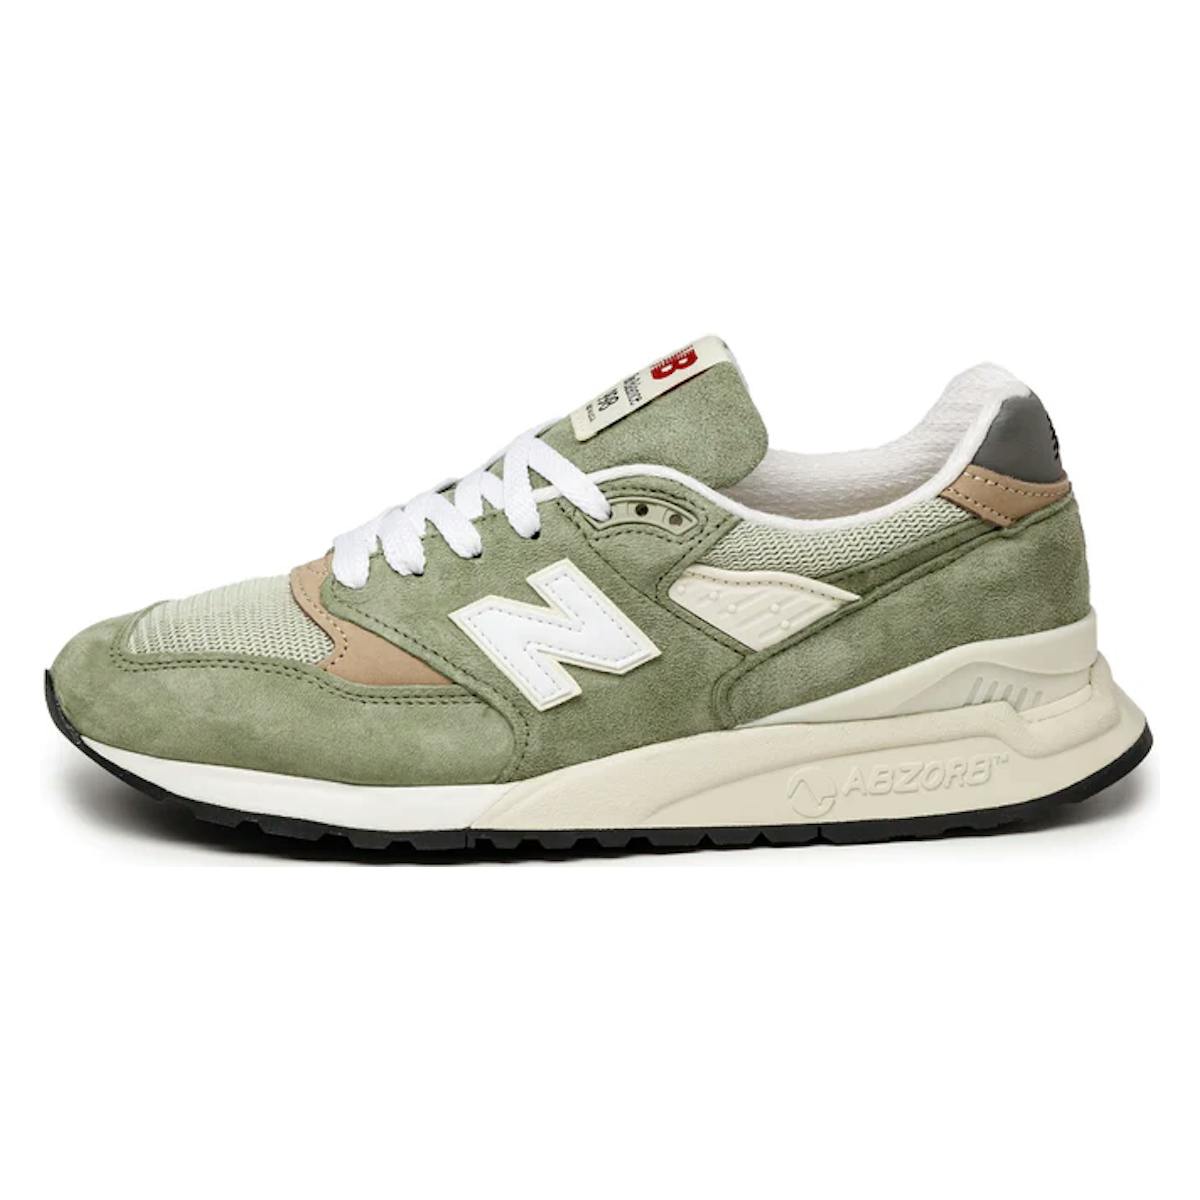 New Balance 998 Made in USA "Olive Incense"